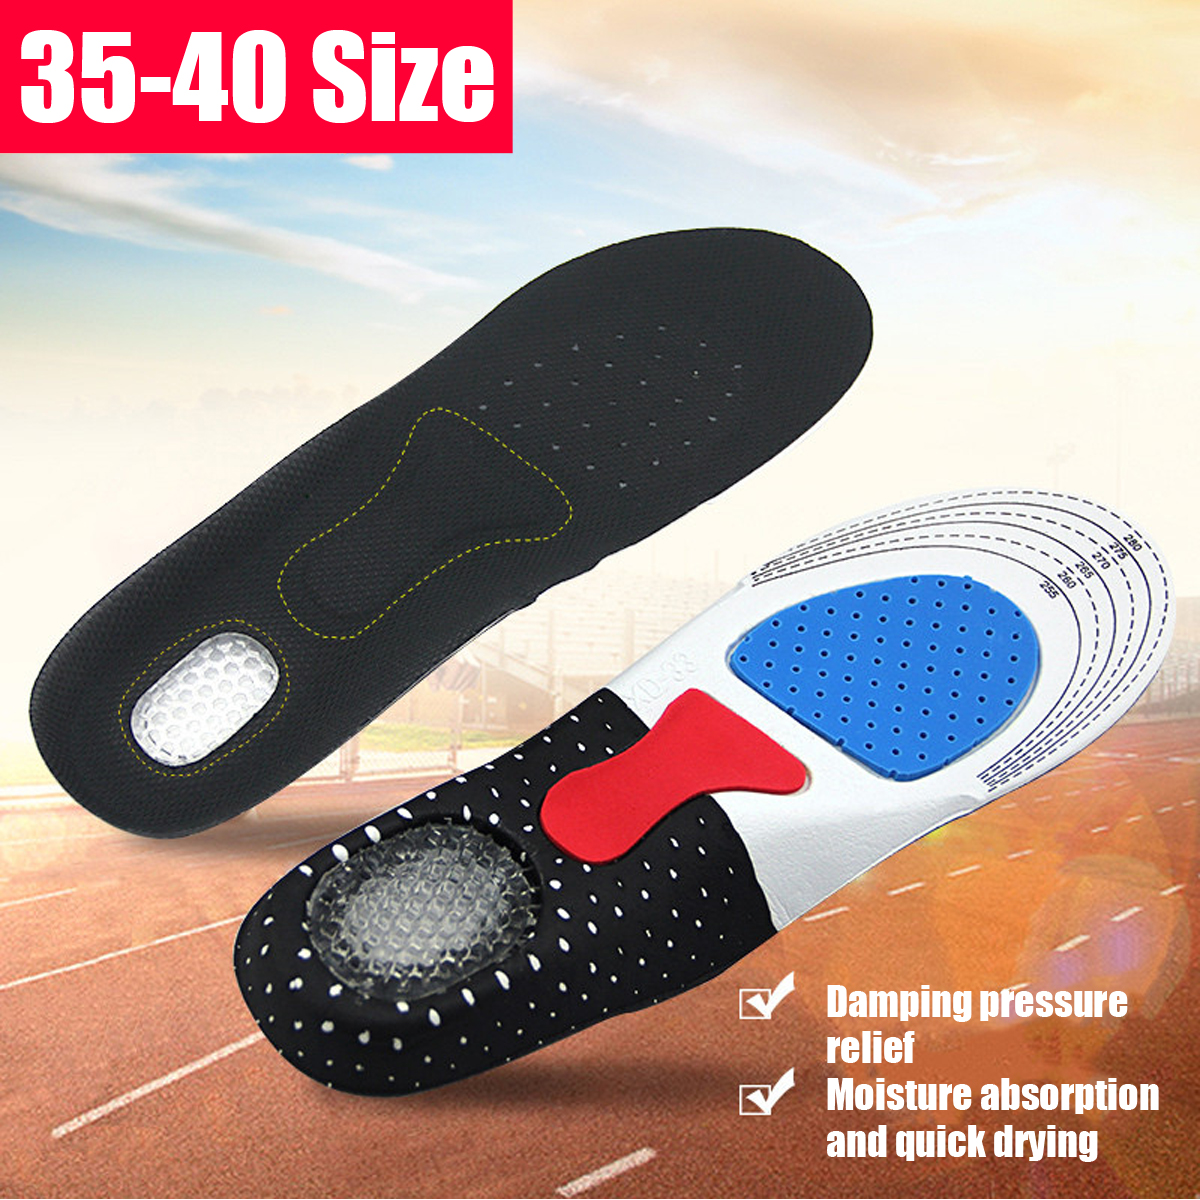 35-40-Size-Men-Women-Fashion-Silica-Gel-Insole-EVA-Cushioning-Insole-Orthotic-Sport-Running-Shoes-In-1426367